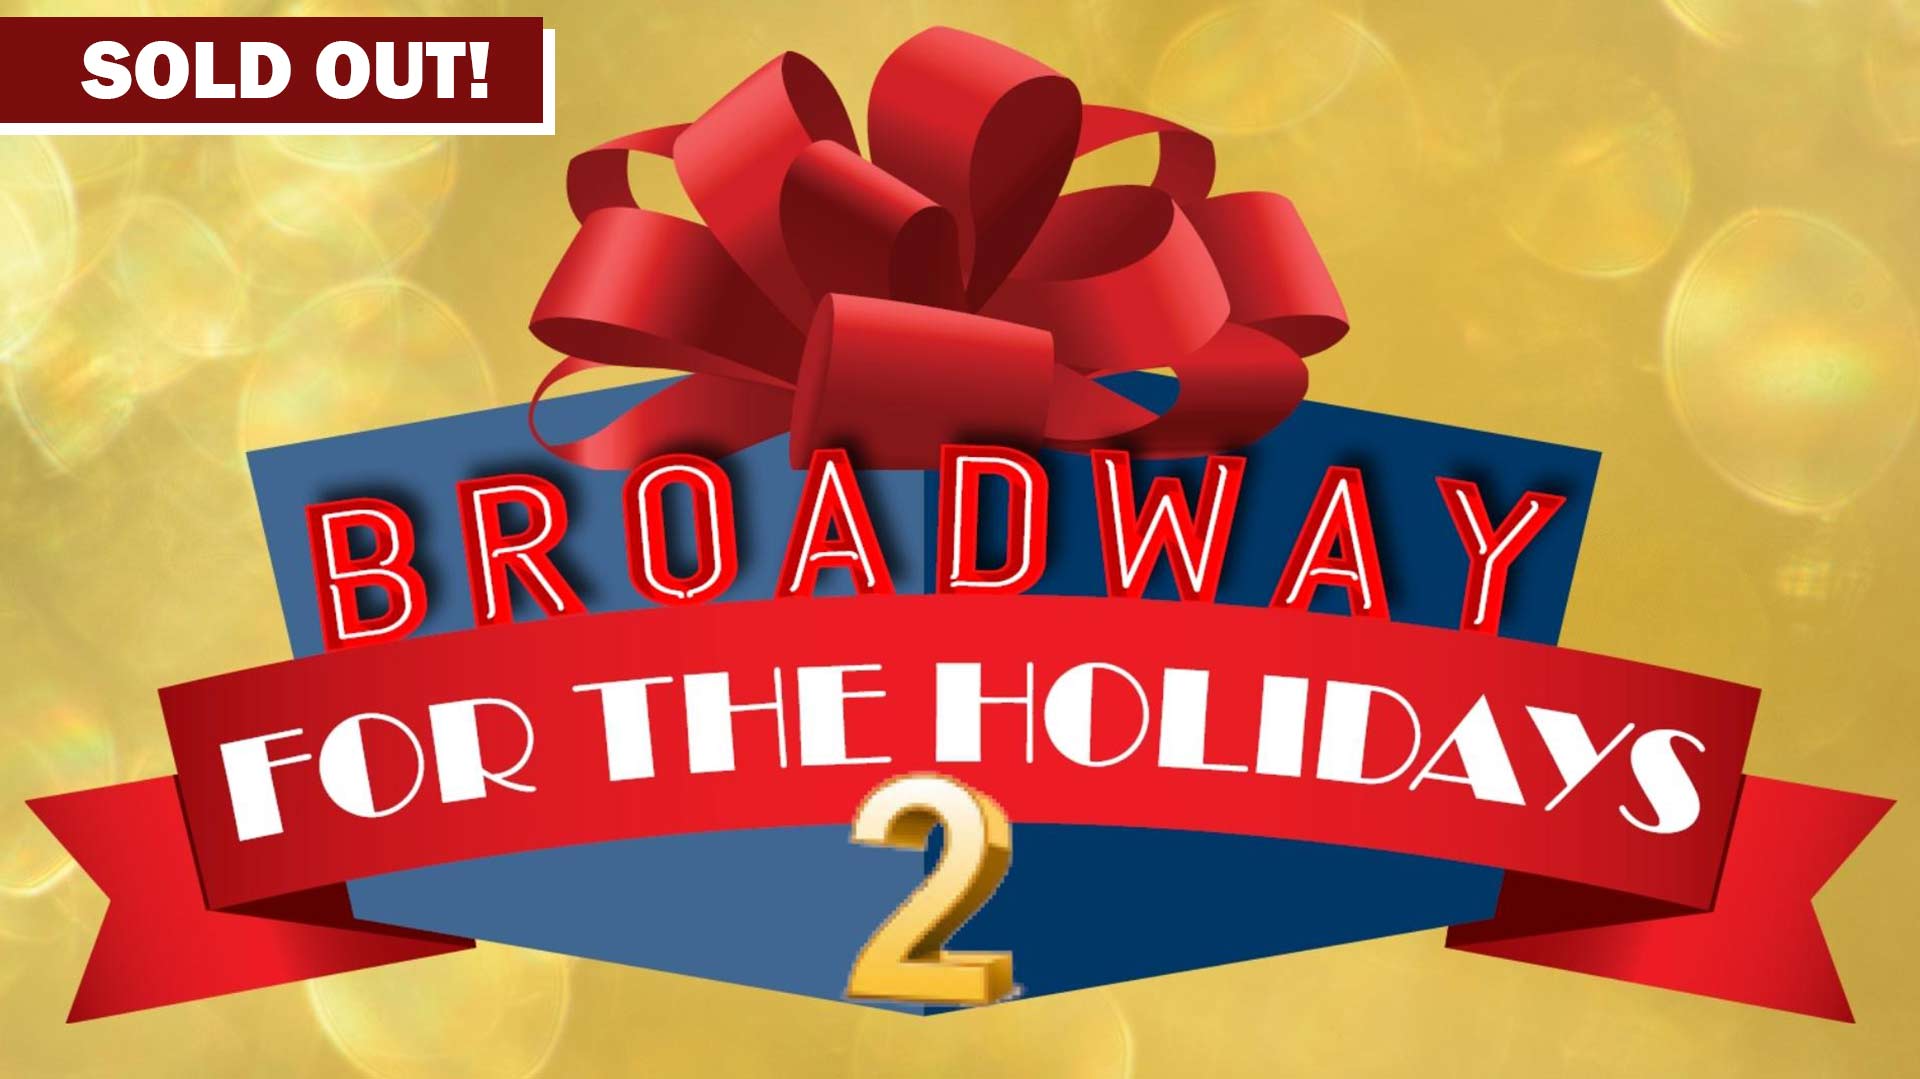 Broadways for the Holidays 2 is Sold Out